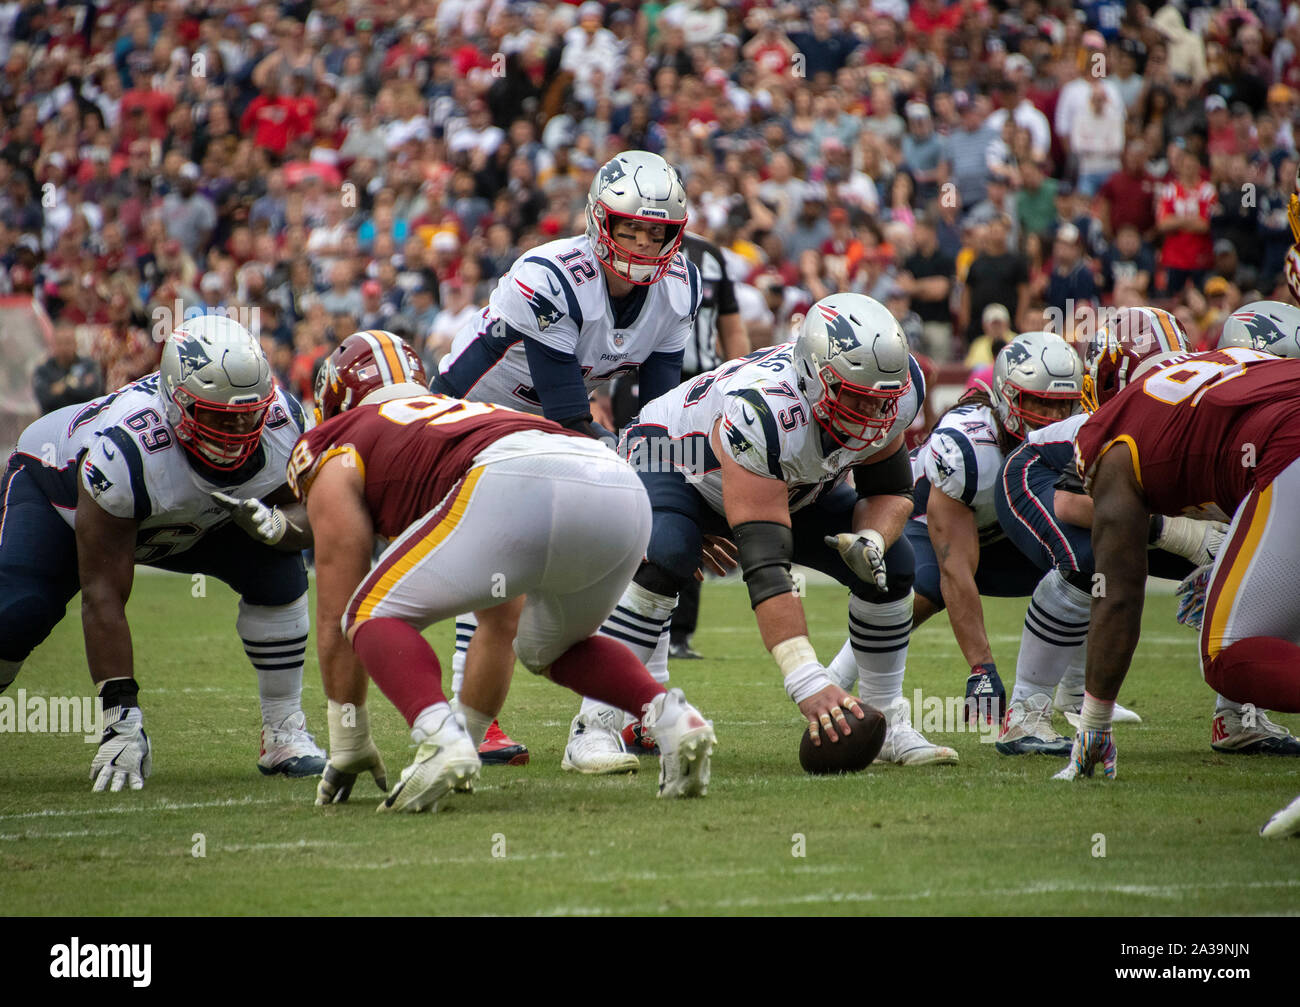 New England Patriots quarterback Tom Brady (12) calls signals during the fourth quarter of the game against the Washington Redskins at FedEx Field in Landover, Maryland on Sunday, October 6, 2019. Also pictured are New England Patriots offensive guard Shaq Mason (69), center Ted Karras (75), fullback Jakob Johnson (47), Washington Redskins defensive end Matthew Ioannidis (98) and Washington Redskins nose tackle Daron Payne (94). The Patriots won the game 33 - 7. Credit: Ron Sachs/CNP | usage worldwide Stock Photo